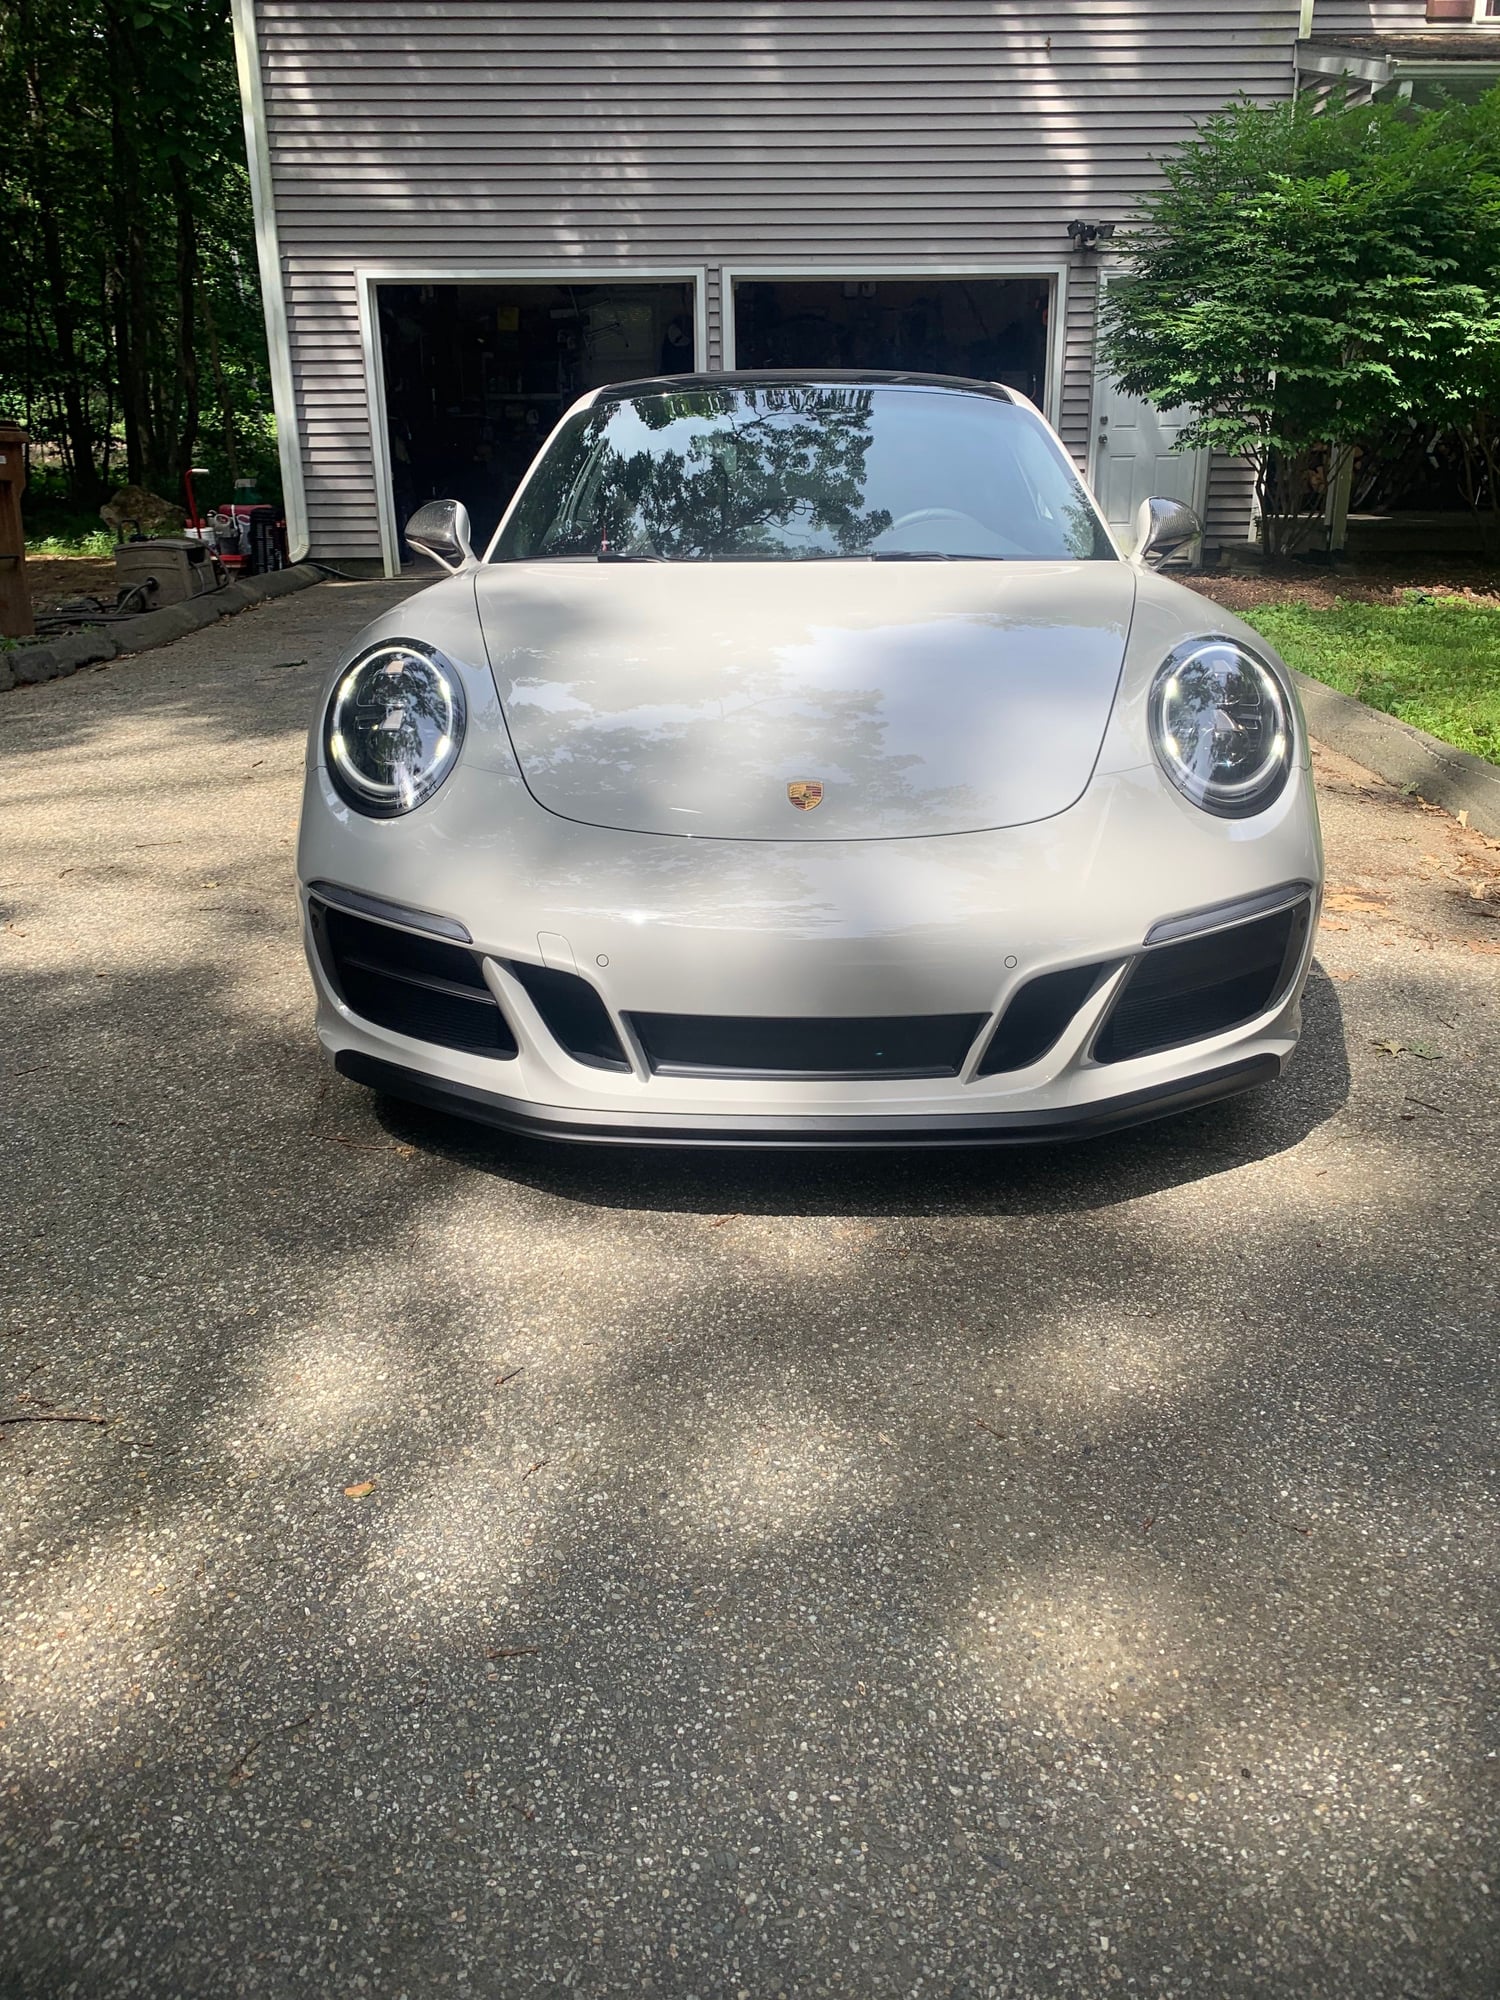 2019 Porsche 911 - 2019  911 4 GTS.. Chalk color...Manual Trans.. ONLY 5500 miles.. EXcellent condition. - Used - VIN WP0AB2A93KS114928 - 5,500 Miles - 6 cyl - 4WD - Manual - Coupe - Other - Shelton, CT 06484, United States